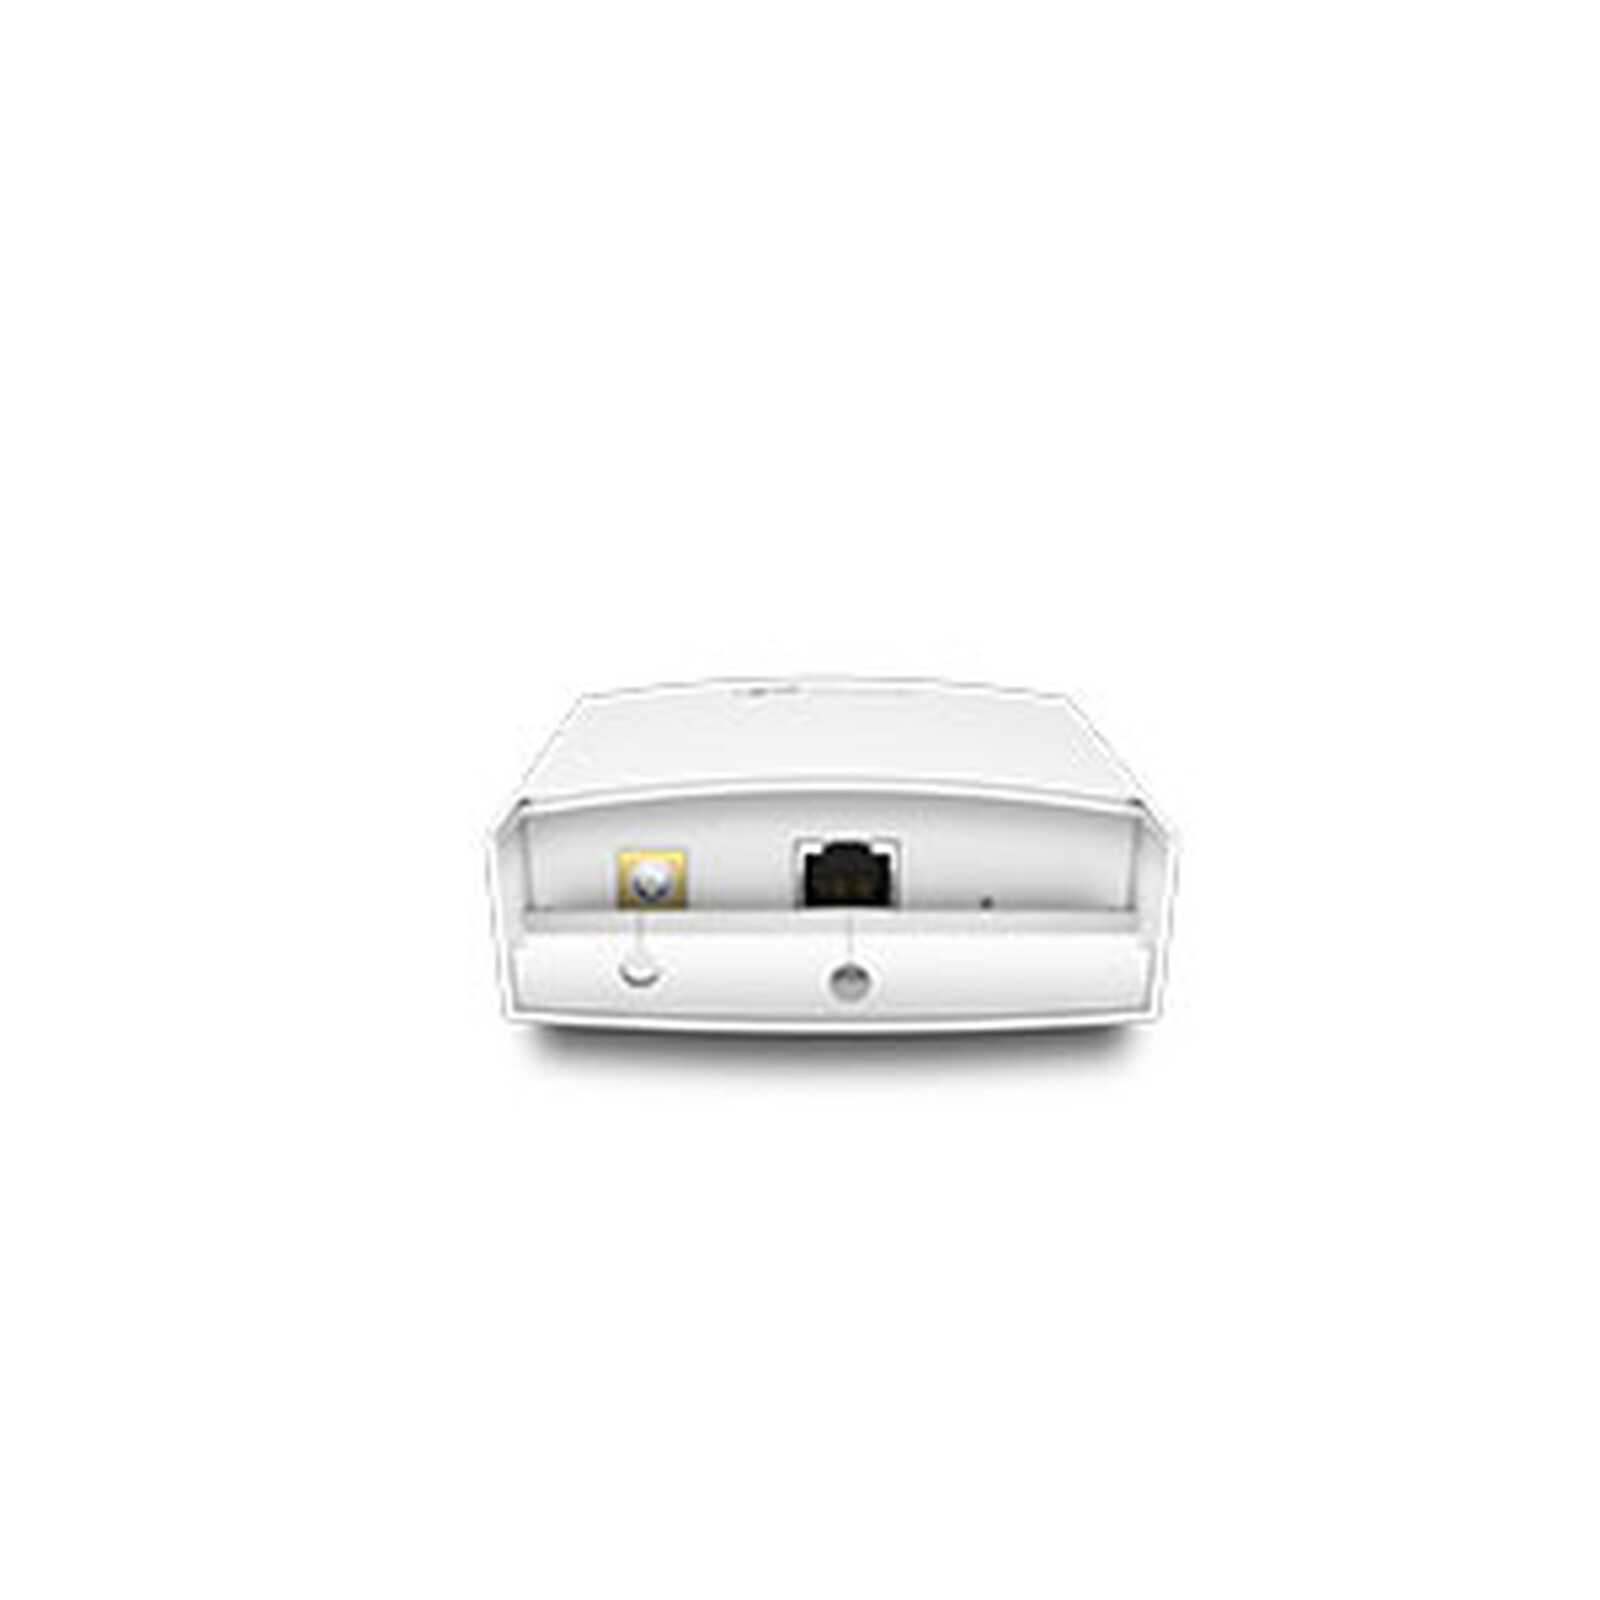 TP-LINK EAP110 Outdoor - Wi-Fi access point - LDLC 3-year warranty